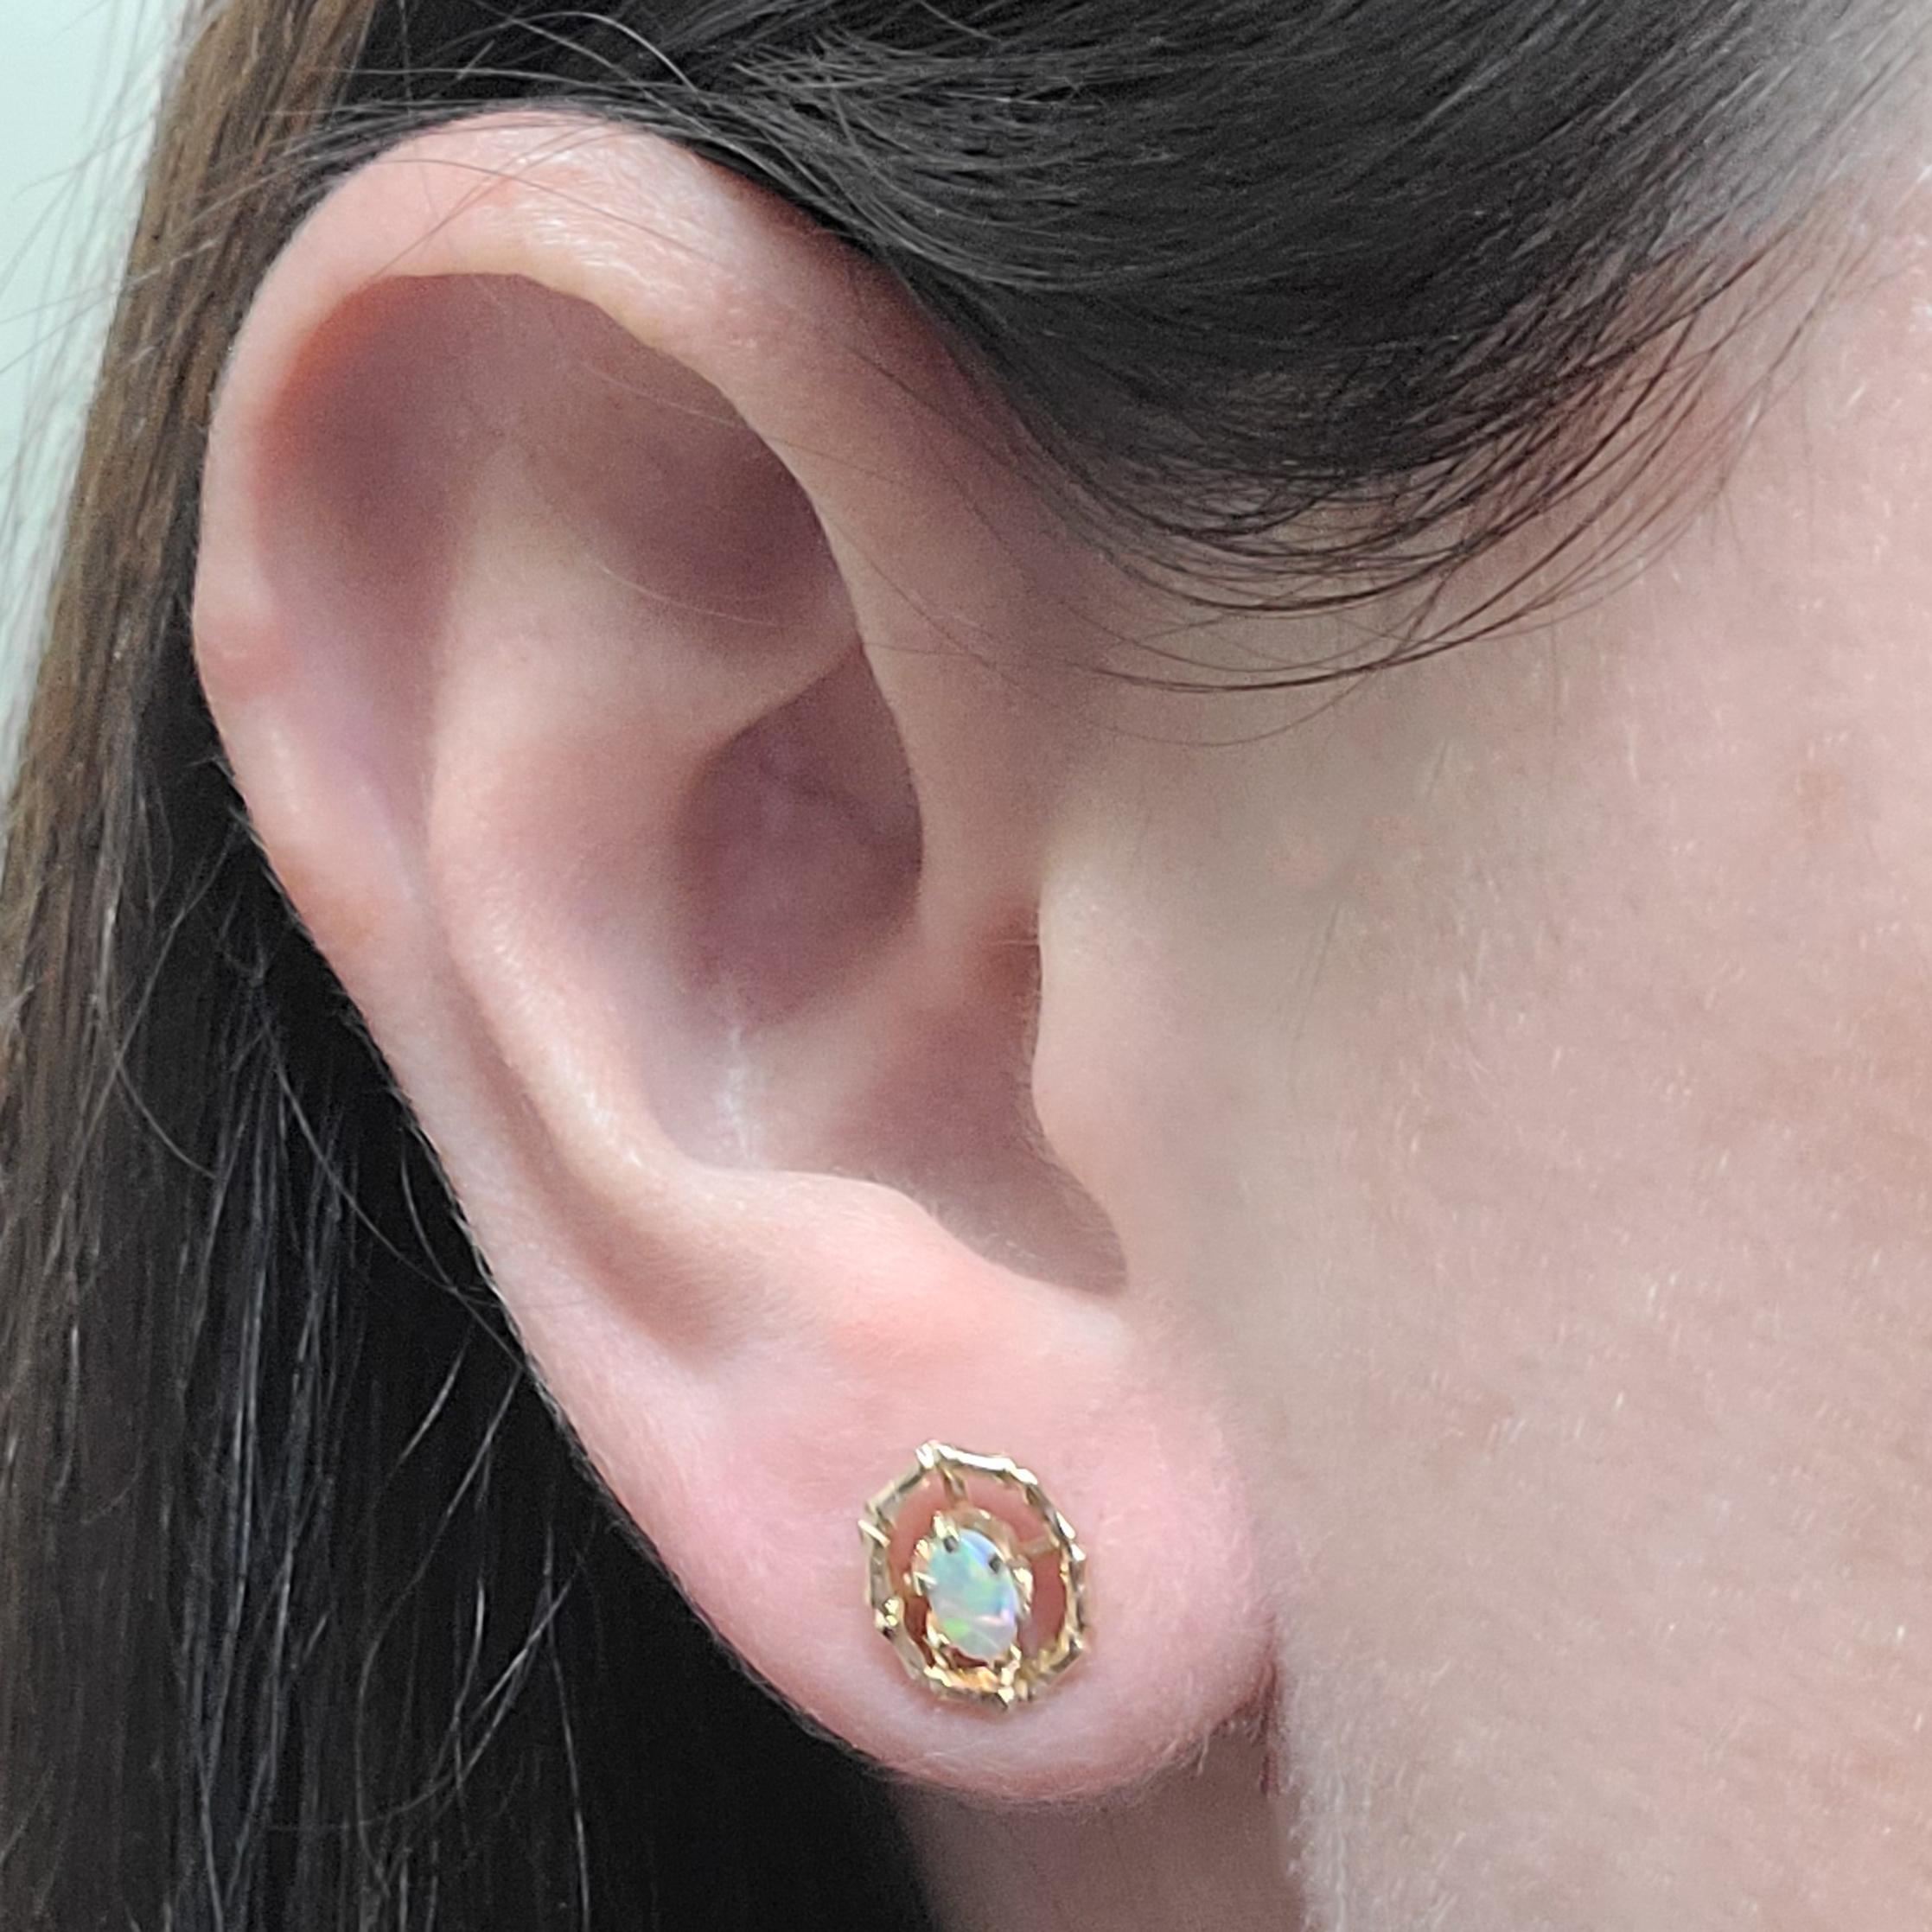 14 Karat Yellow Gold Stud Earrings Featuring Oval Cabochon Opals Surrounded By A Bamboo Texture Gold Halo. Pierced Post With Friction Back. Finished Weight Is 2.0 Grams.